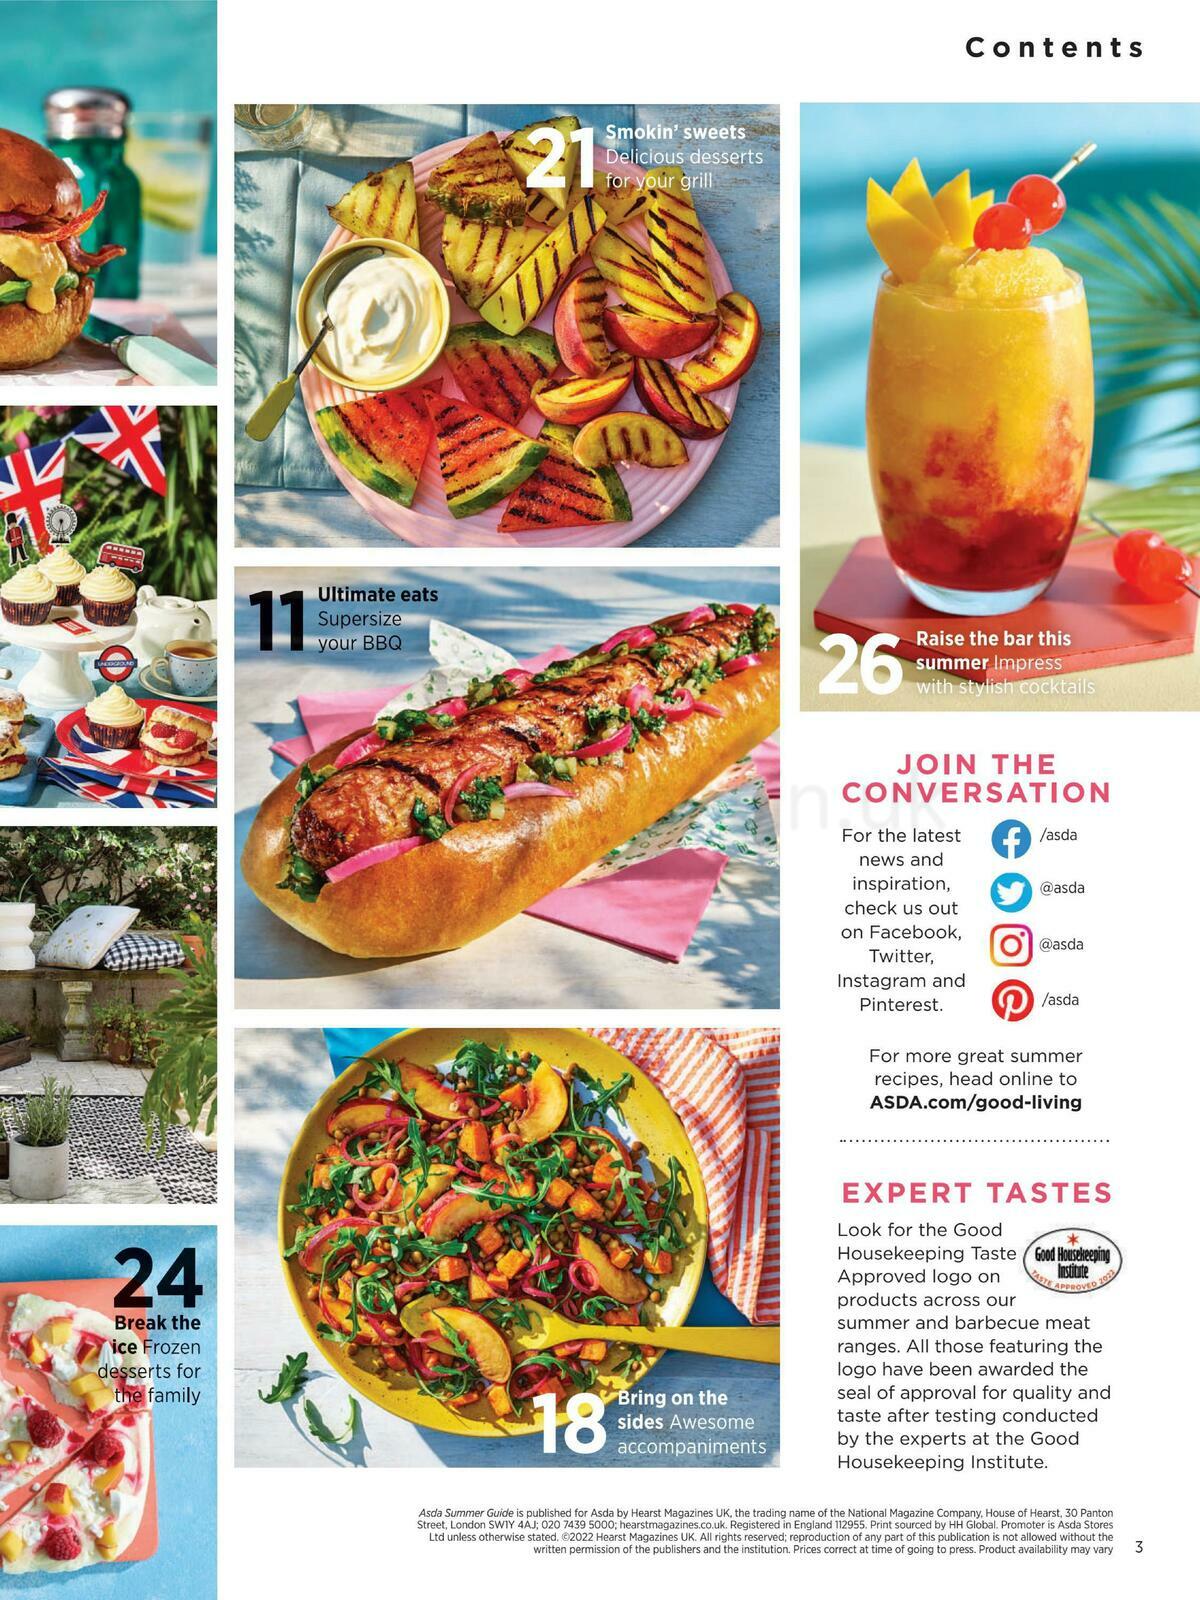 ASDA Summer Guide Offers from 16 May